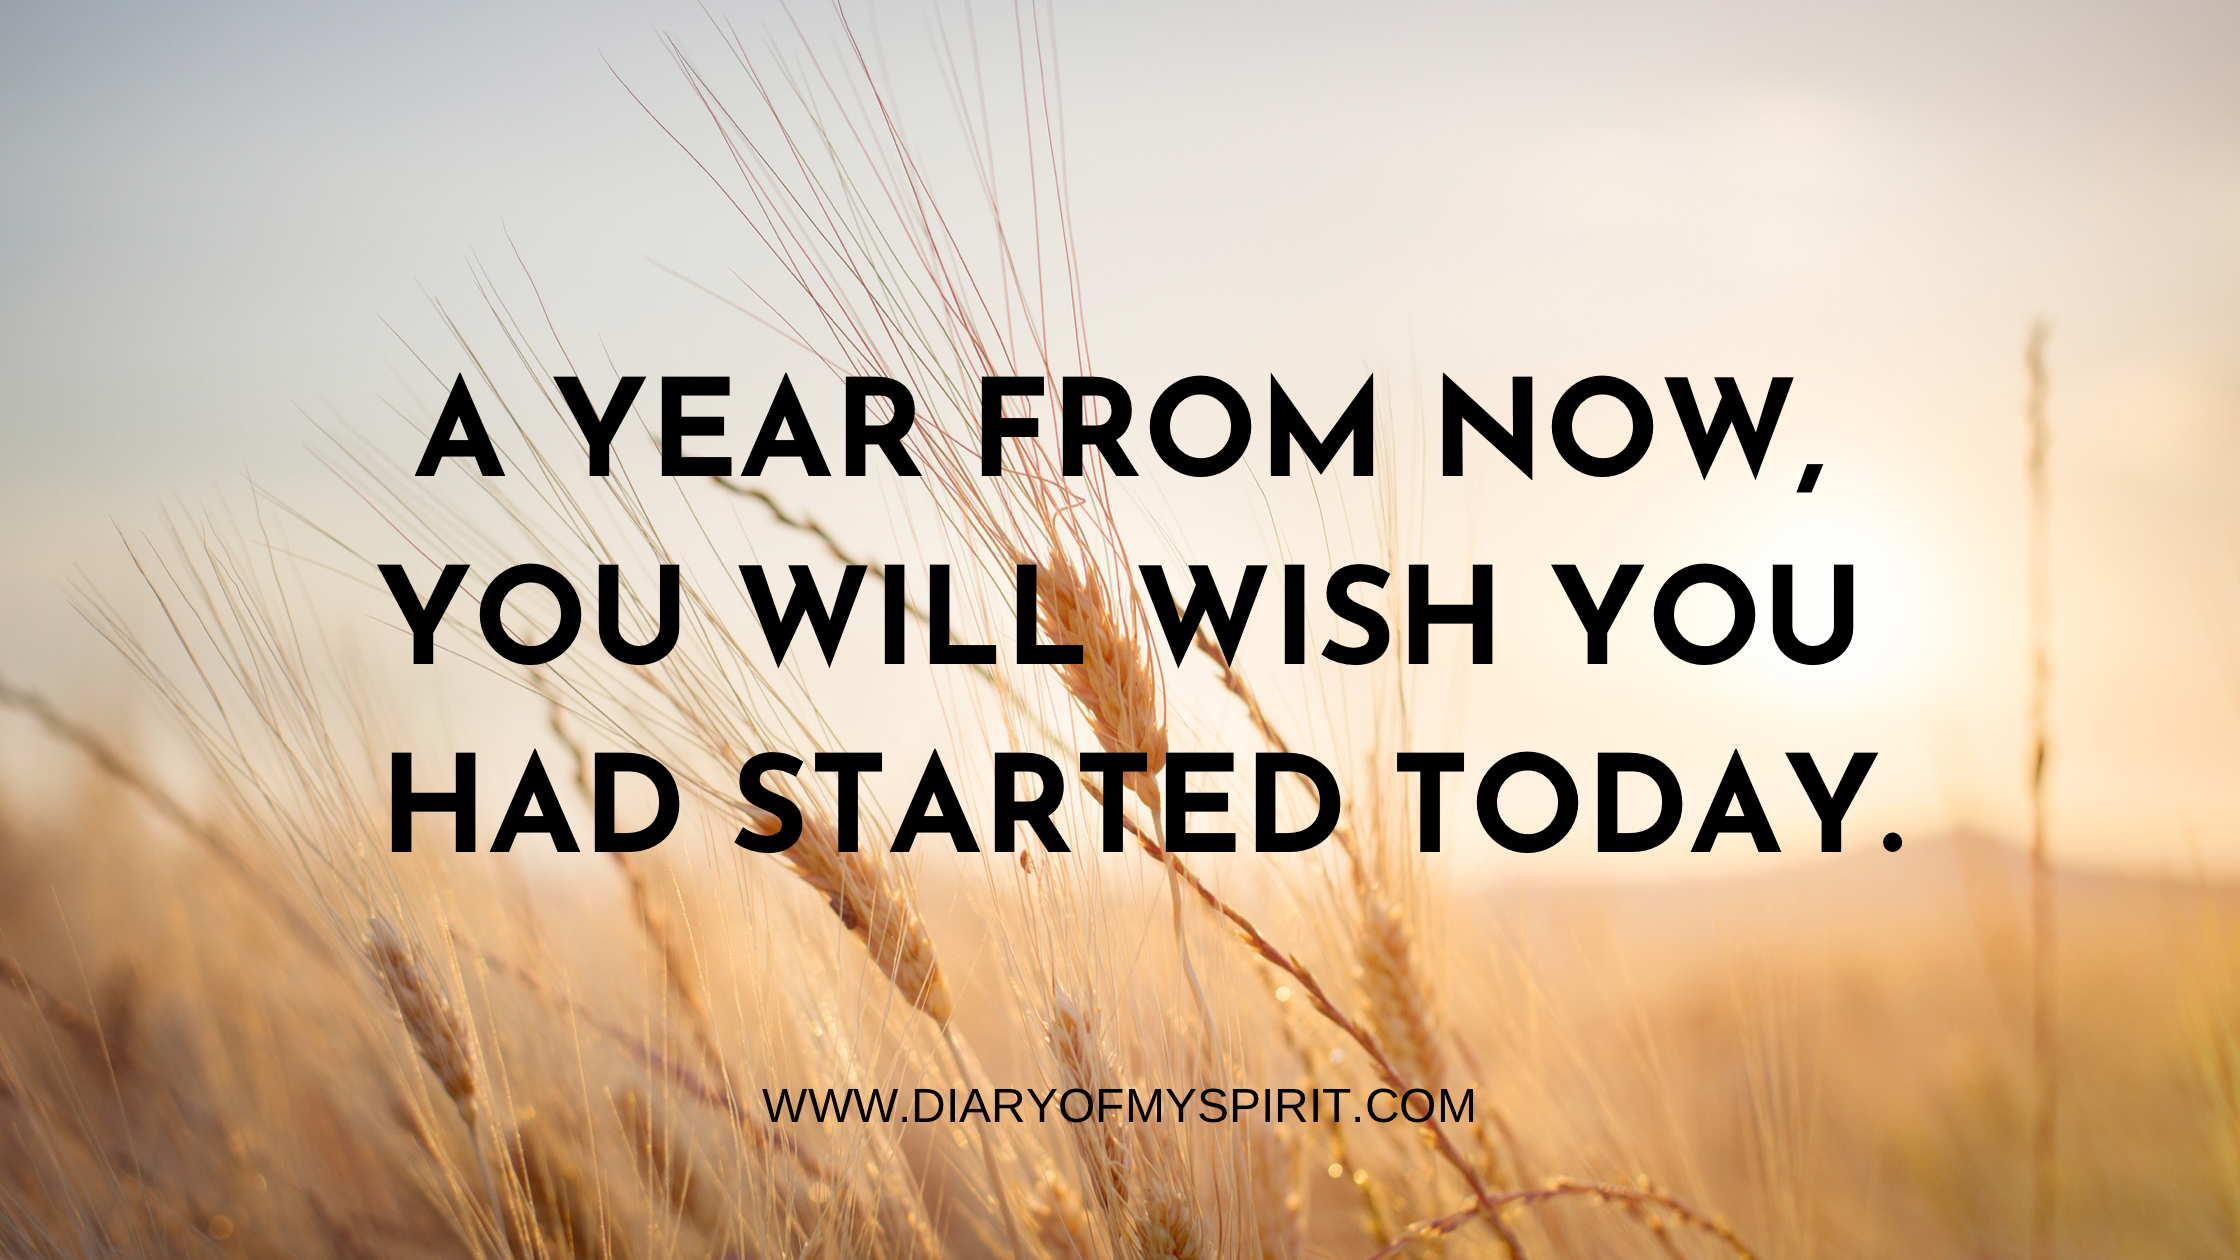 A year from now you will wish you had started today. life mottos to live by. life motto. life mottos. motto quote. mottos in life. mottos about life. mottos for life. motto life. motto in life. motto to live by. life's mottos. mottos examples. motto quotes. motto examples. examples of motto. personal motto. mottos to live by. good mottos. best mottos. personal mottos.